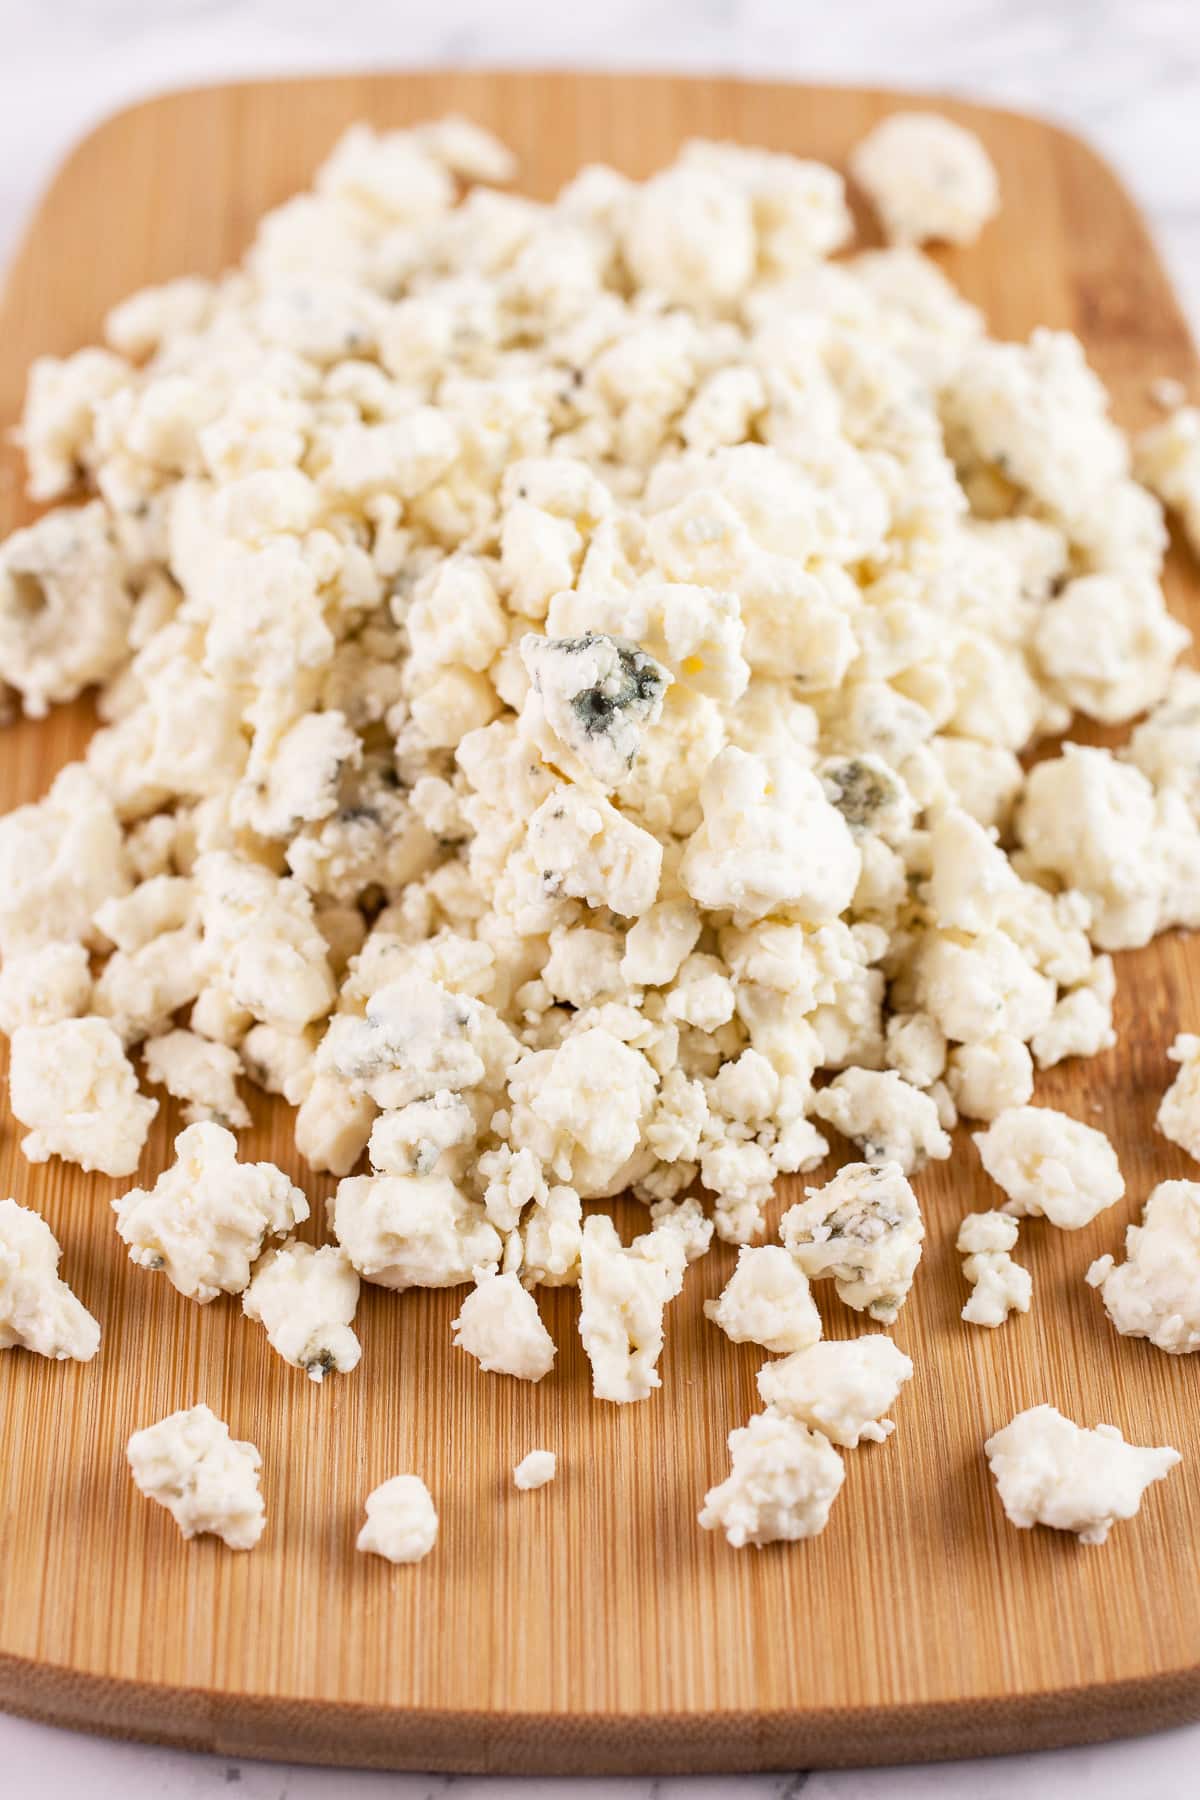 Blue cheese crumbles on wooden cutting board.